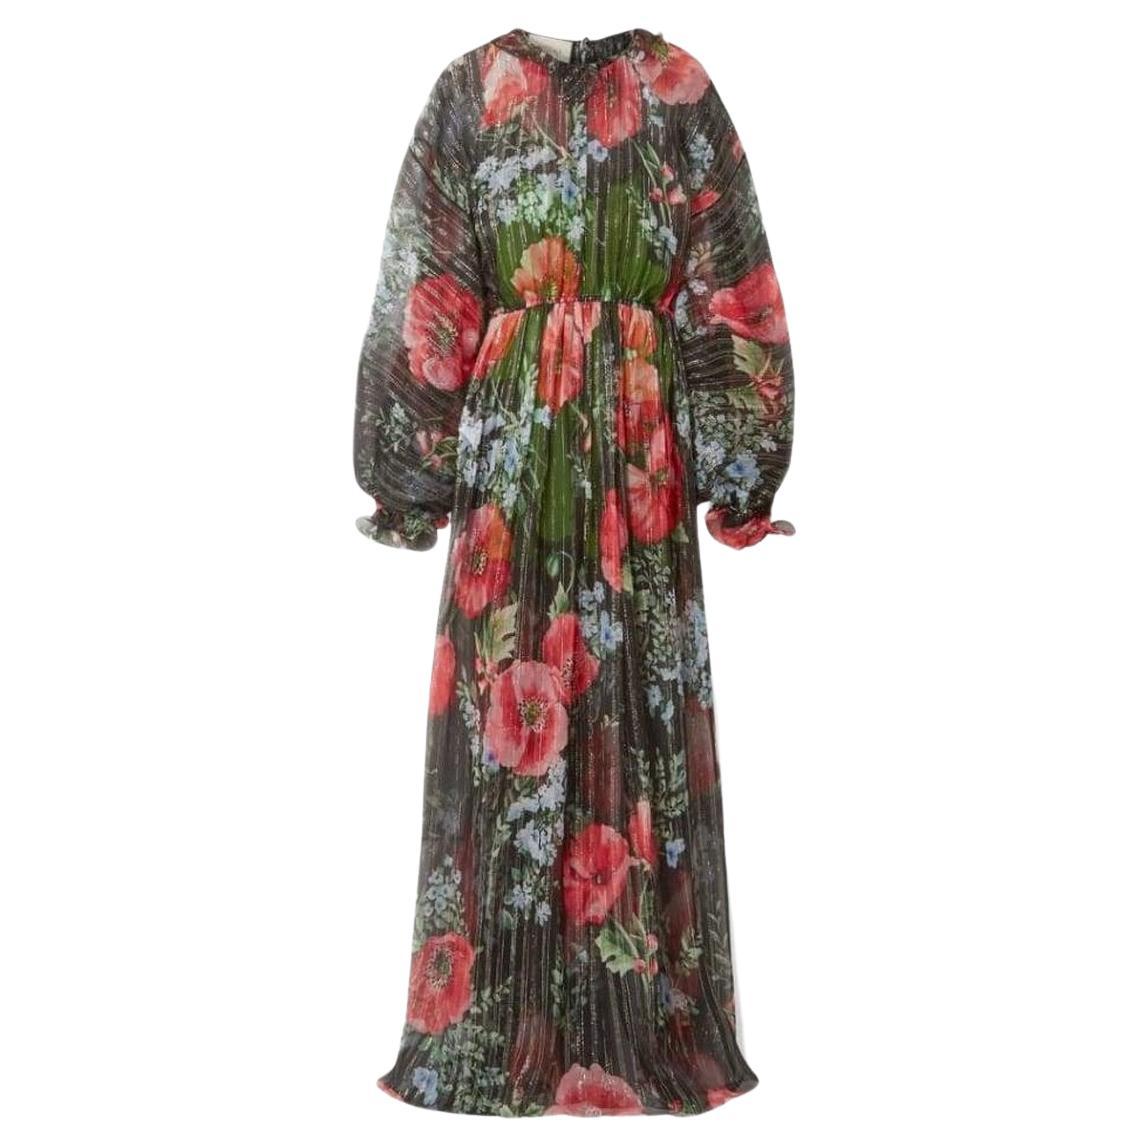 Gucci Floral-print Crinkled Silk-blend Chiffon Gown IT42 US6